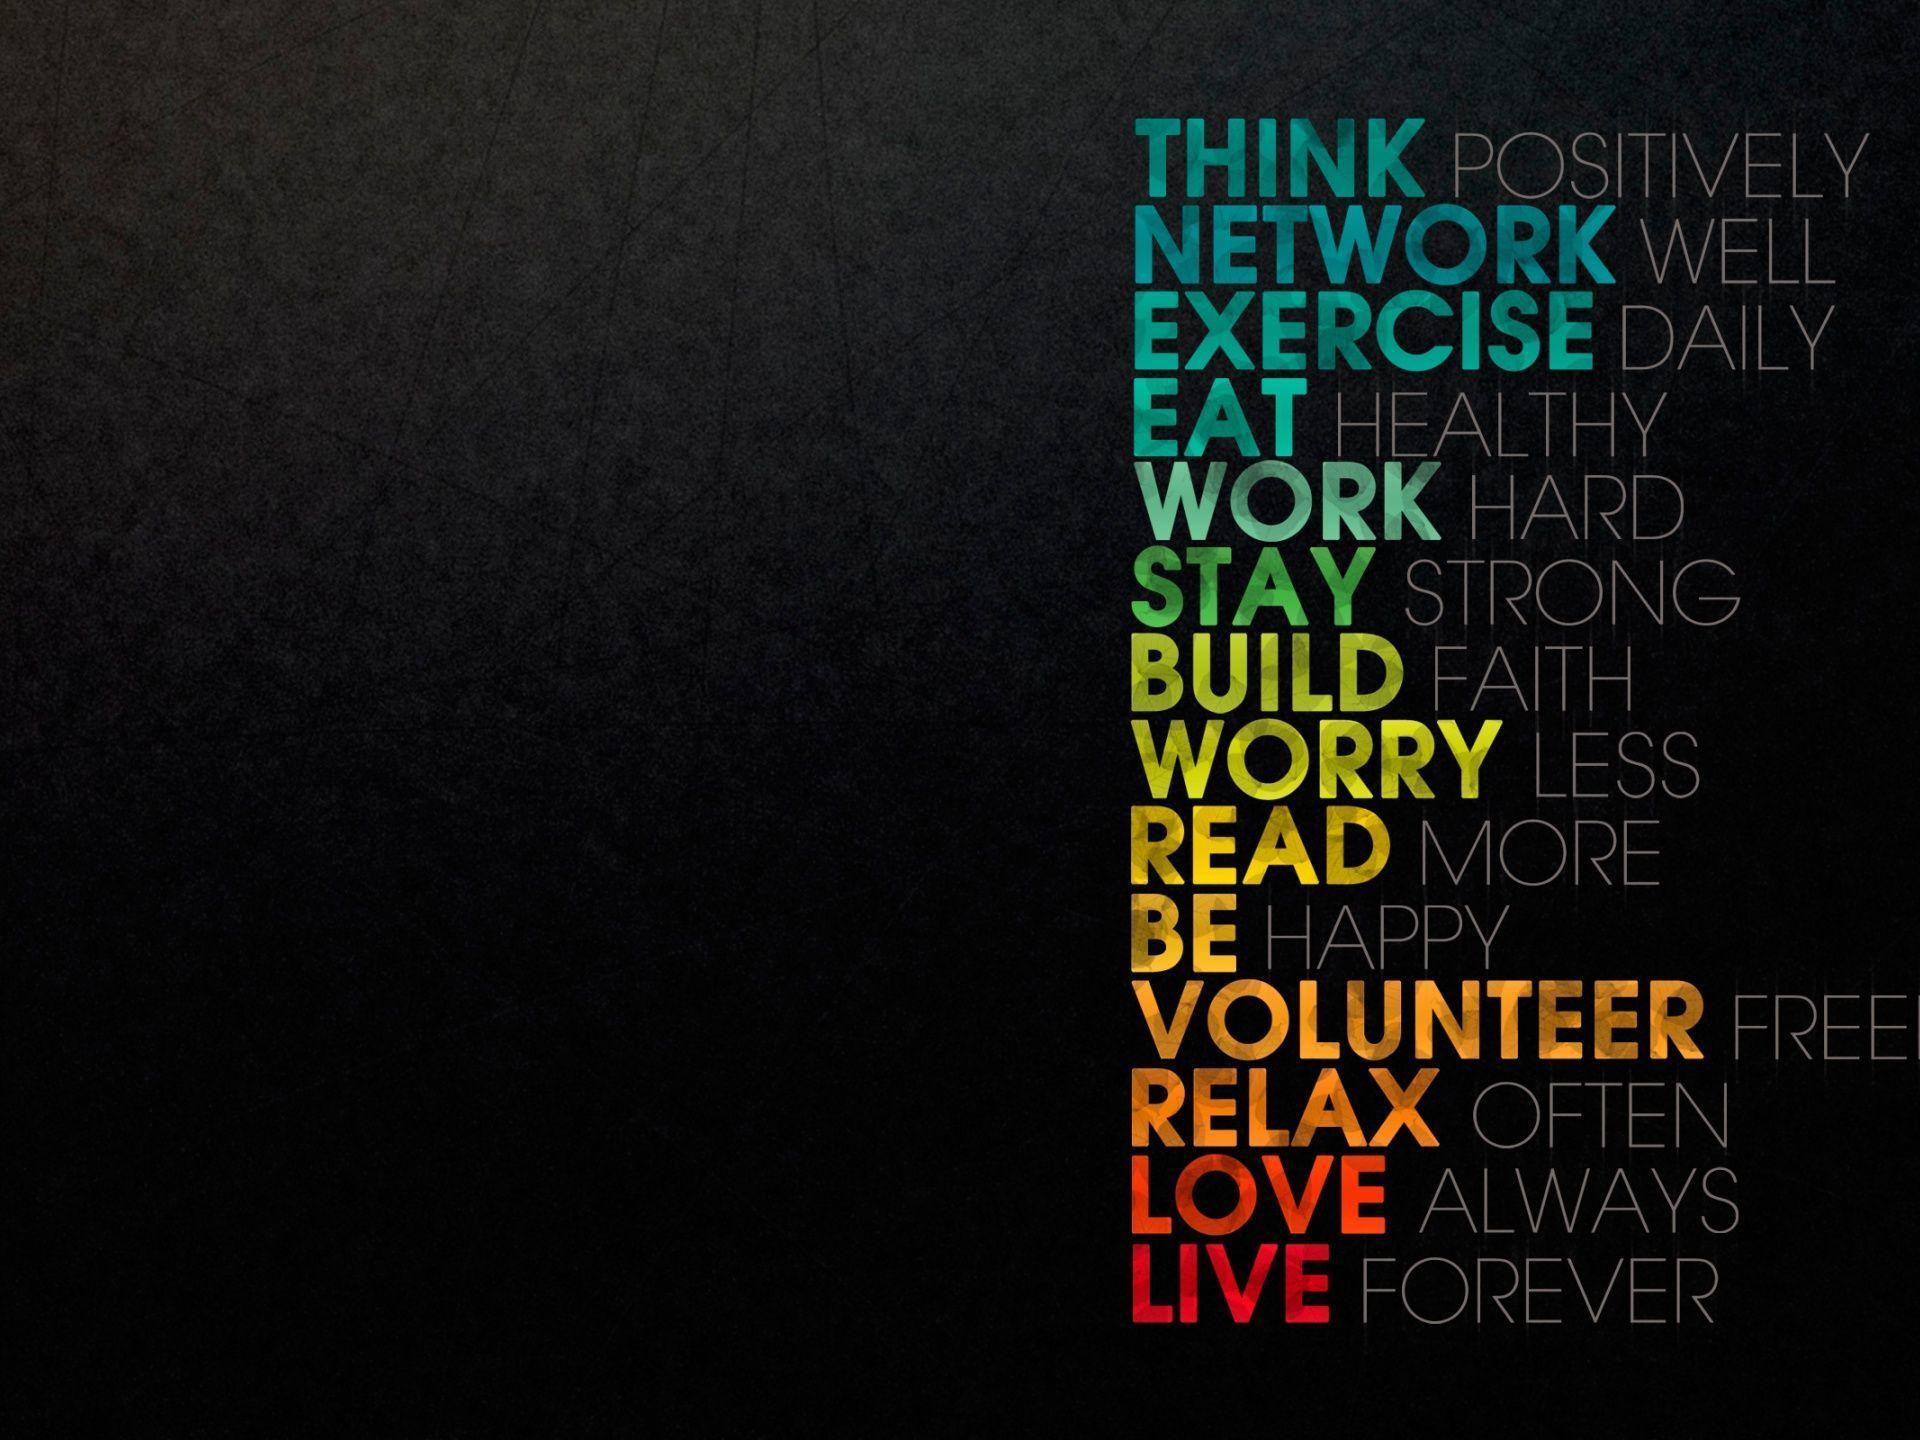 HD Motivational Wallpaper that Inspires You Everyday